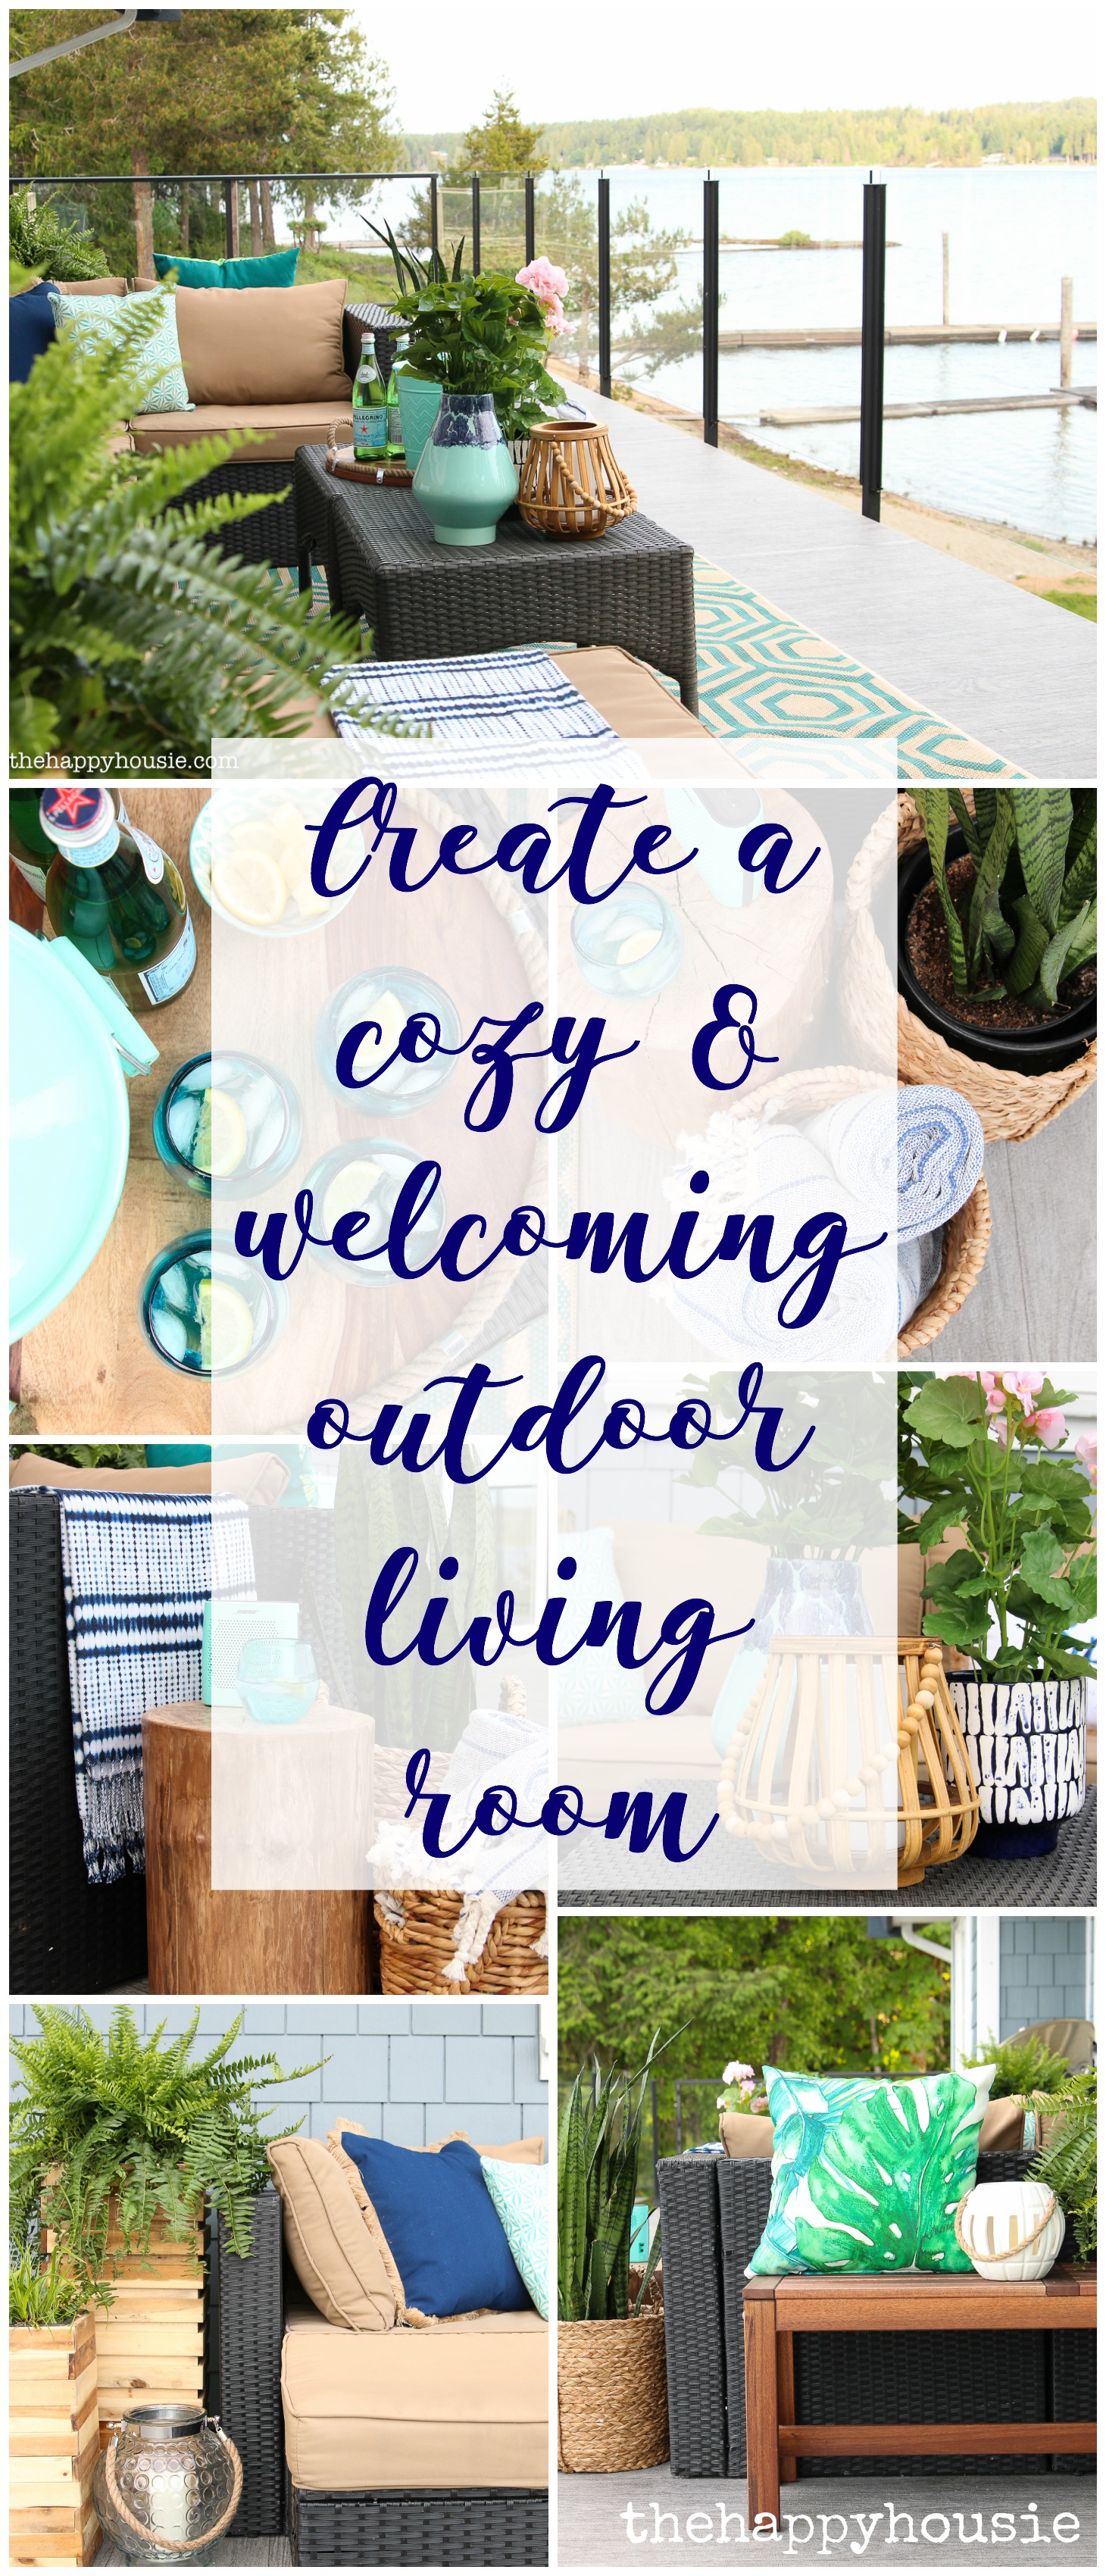 Create a cozy and welcoming outdoor living room poster.